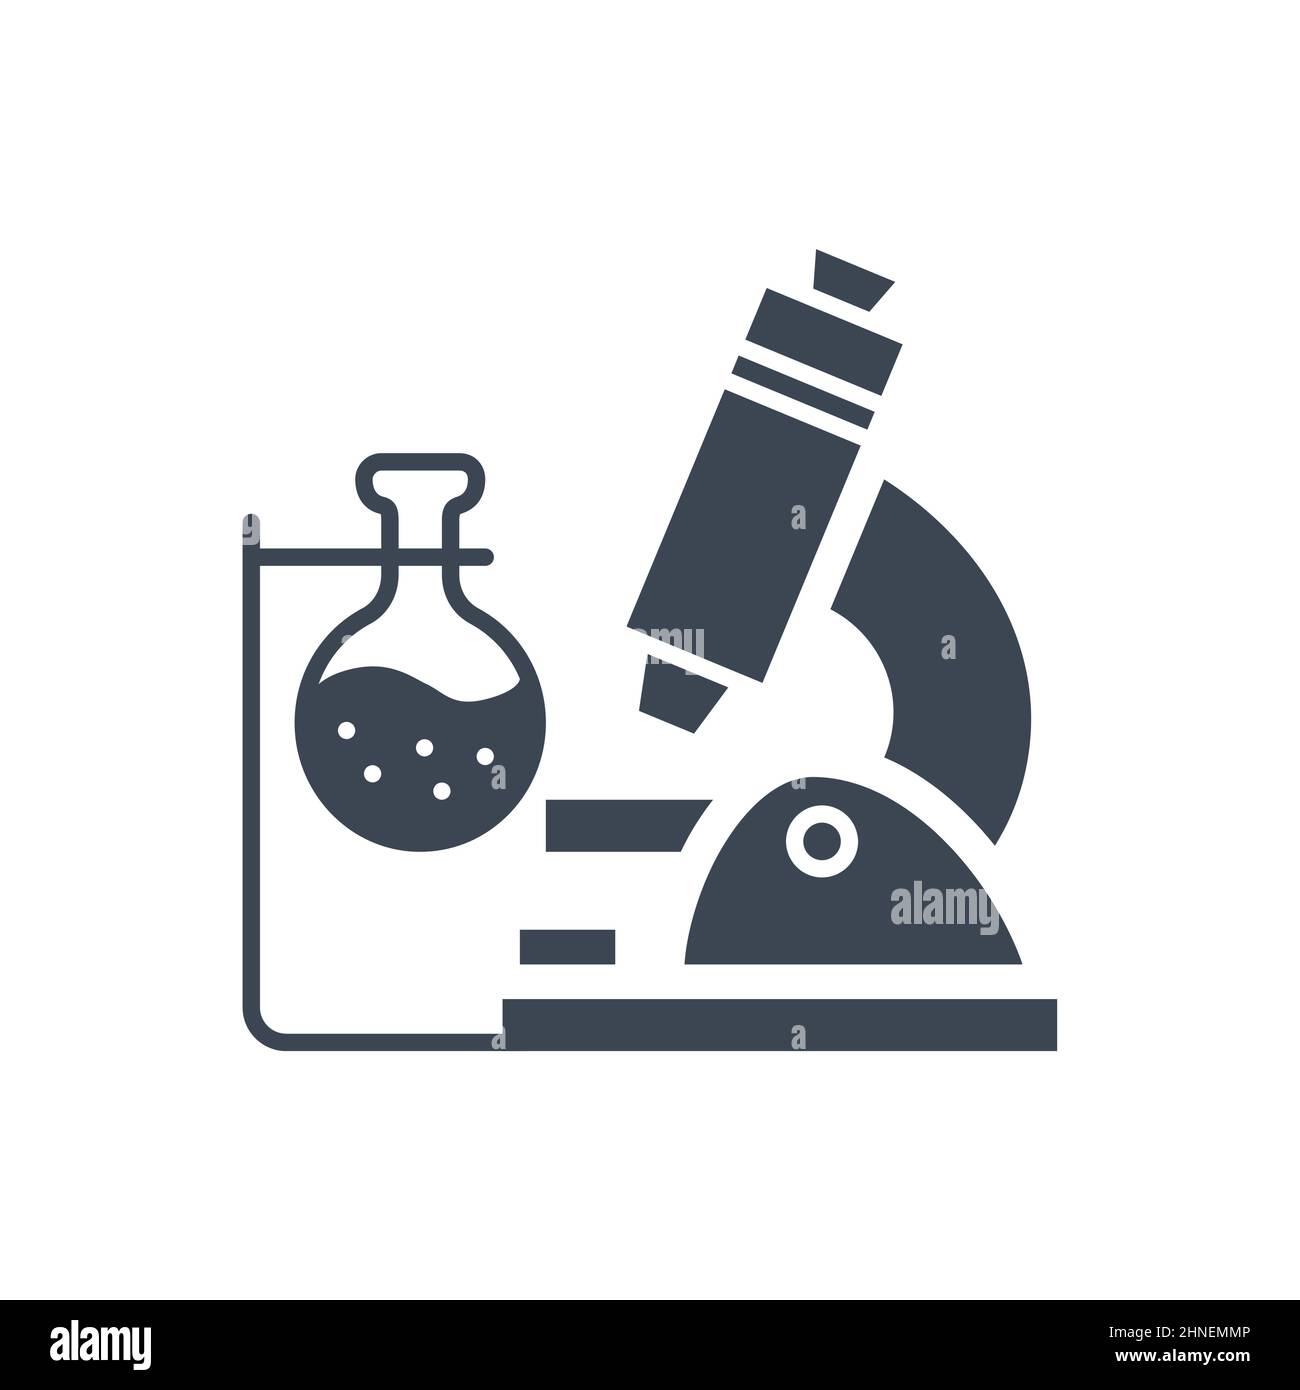 medical research icon